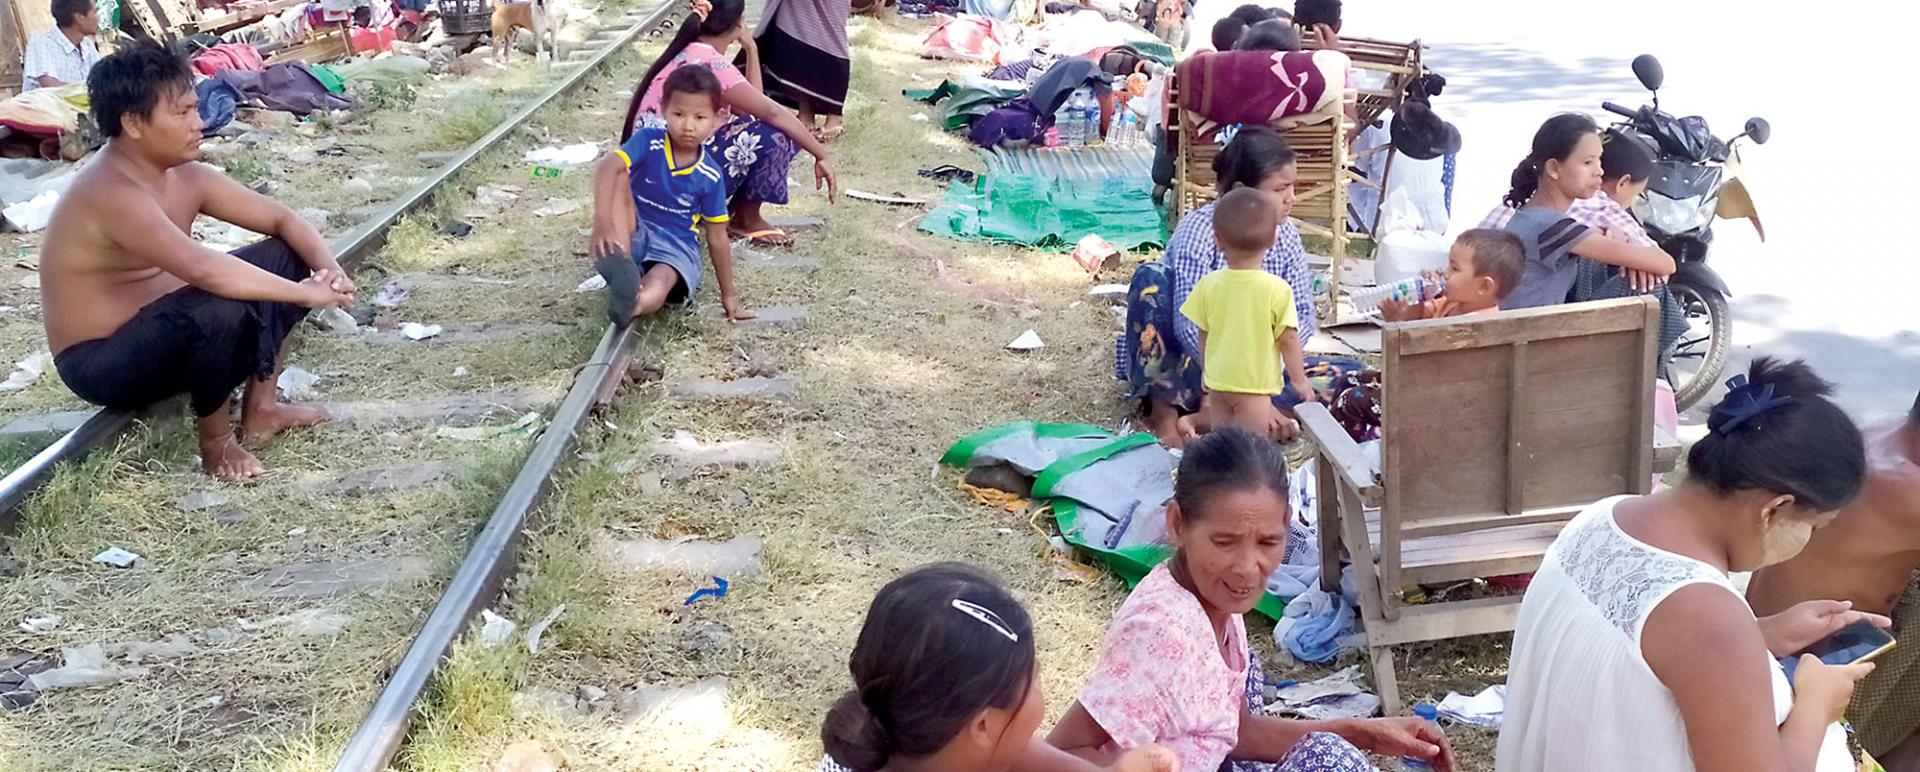 flood victims are staying beside the railroad